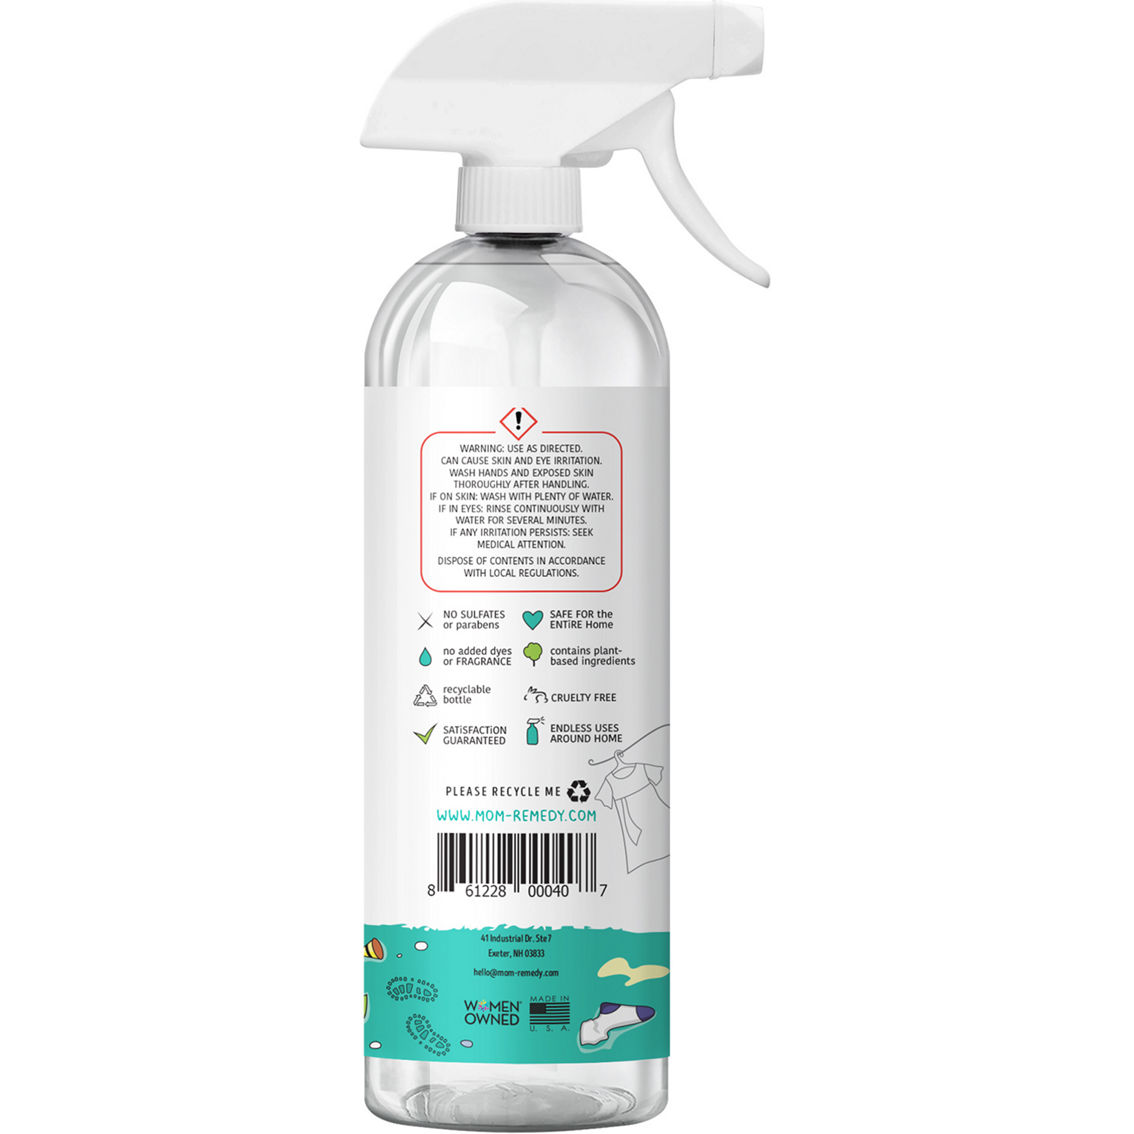 MomRemedy Everything Household Cleaner and Stain Remover 3 pk. - Image 3 of 3